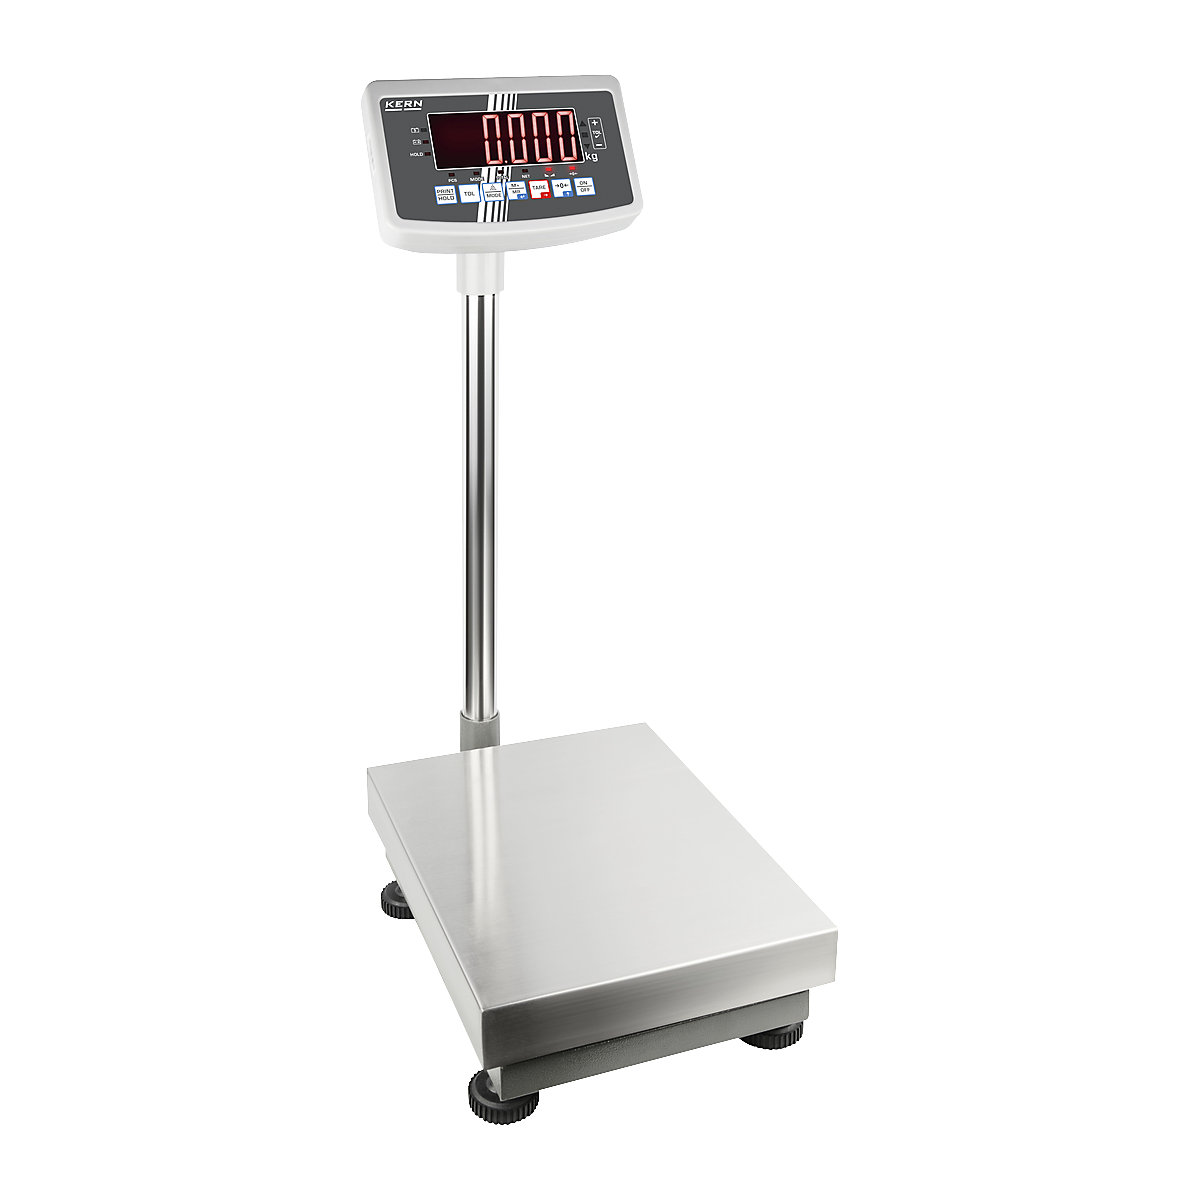 Platform scales – KERN, with large weighing plate, weighing range up to 30 kg, read-out accuracy 2 g-1